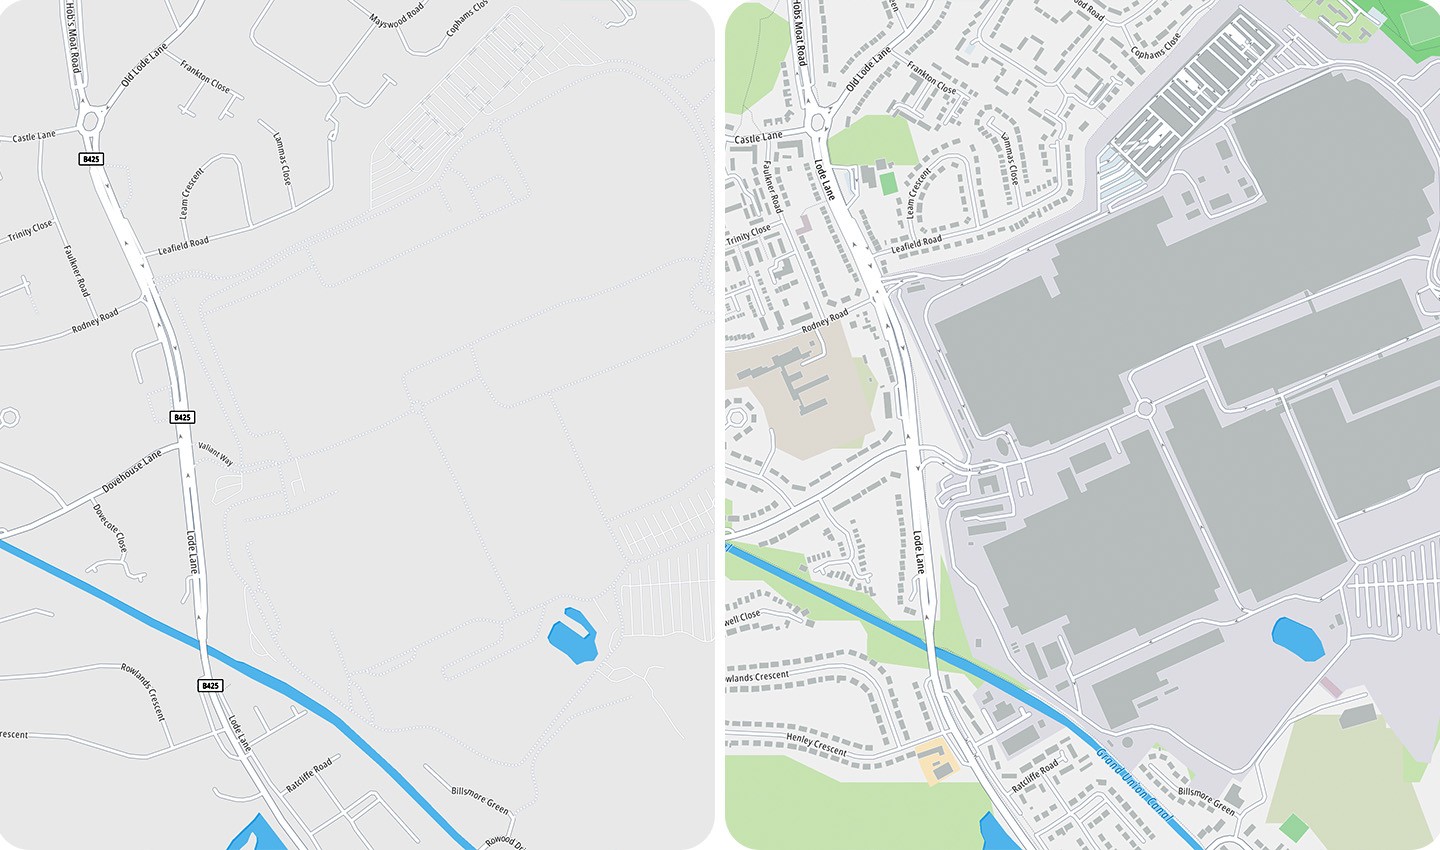 An image showing the improved quality of TomTom's Orbis Map. It's richer in detail, accuracy and coverage.